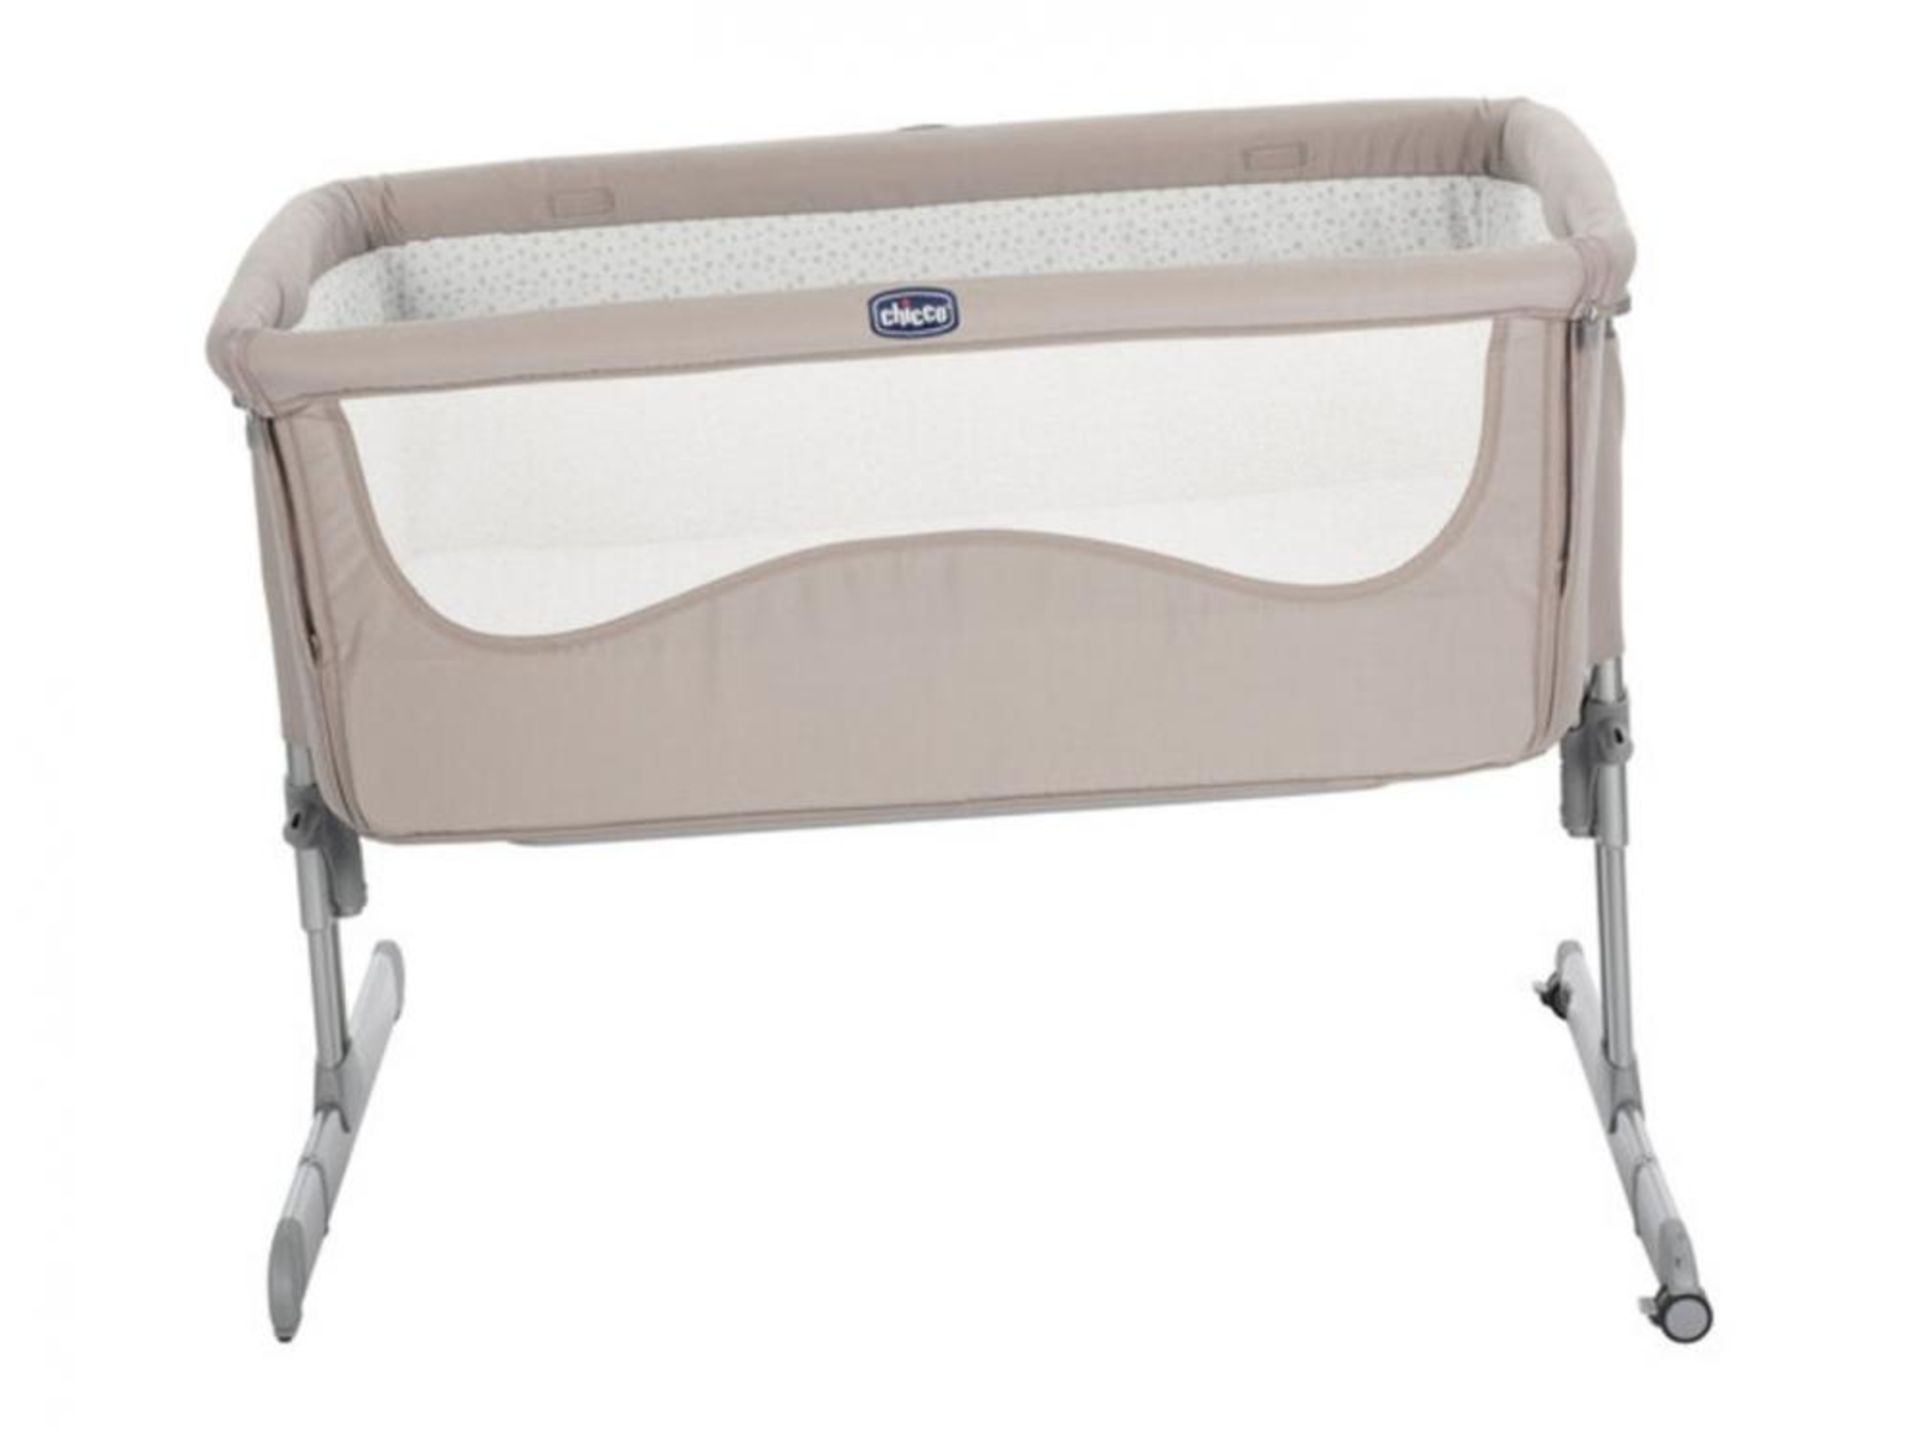 1 x Chicco Next2me Chick to Chick Bedside Baby Crib - Brand New 2019 Sealed Stock - Includes Mattres - Image 2 of 10